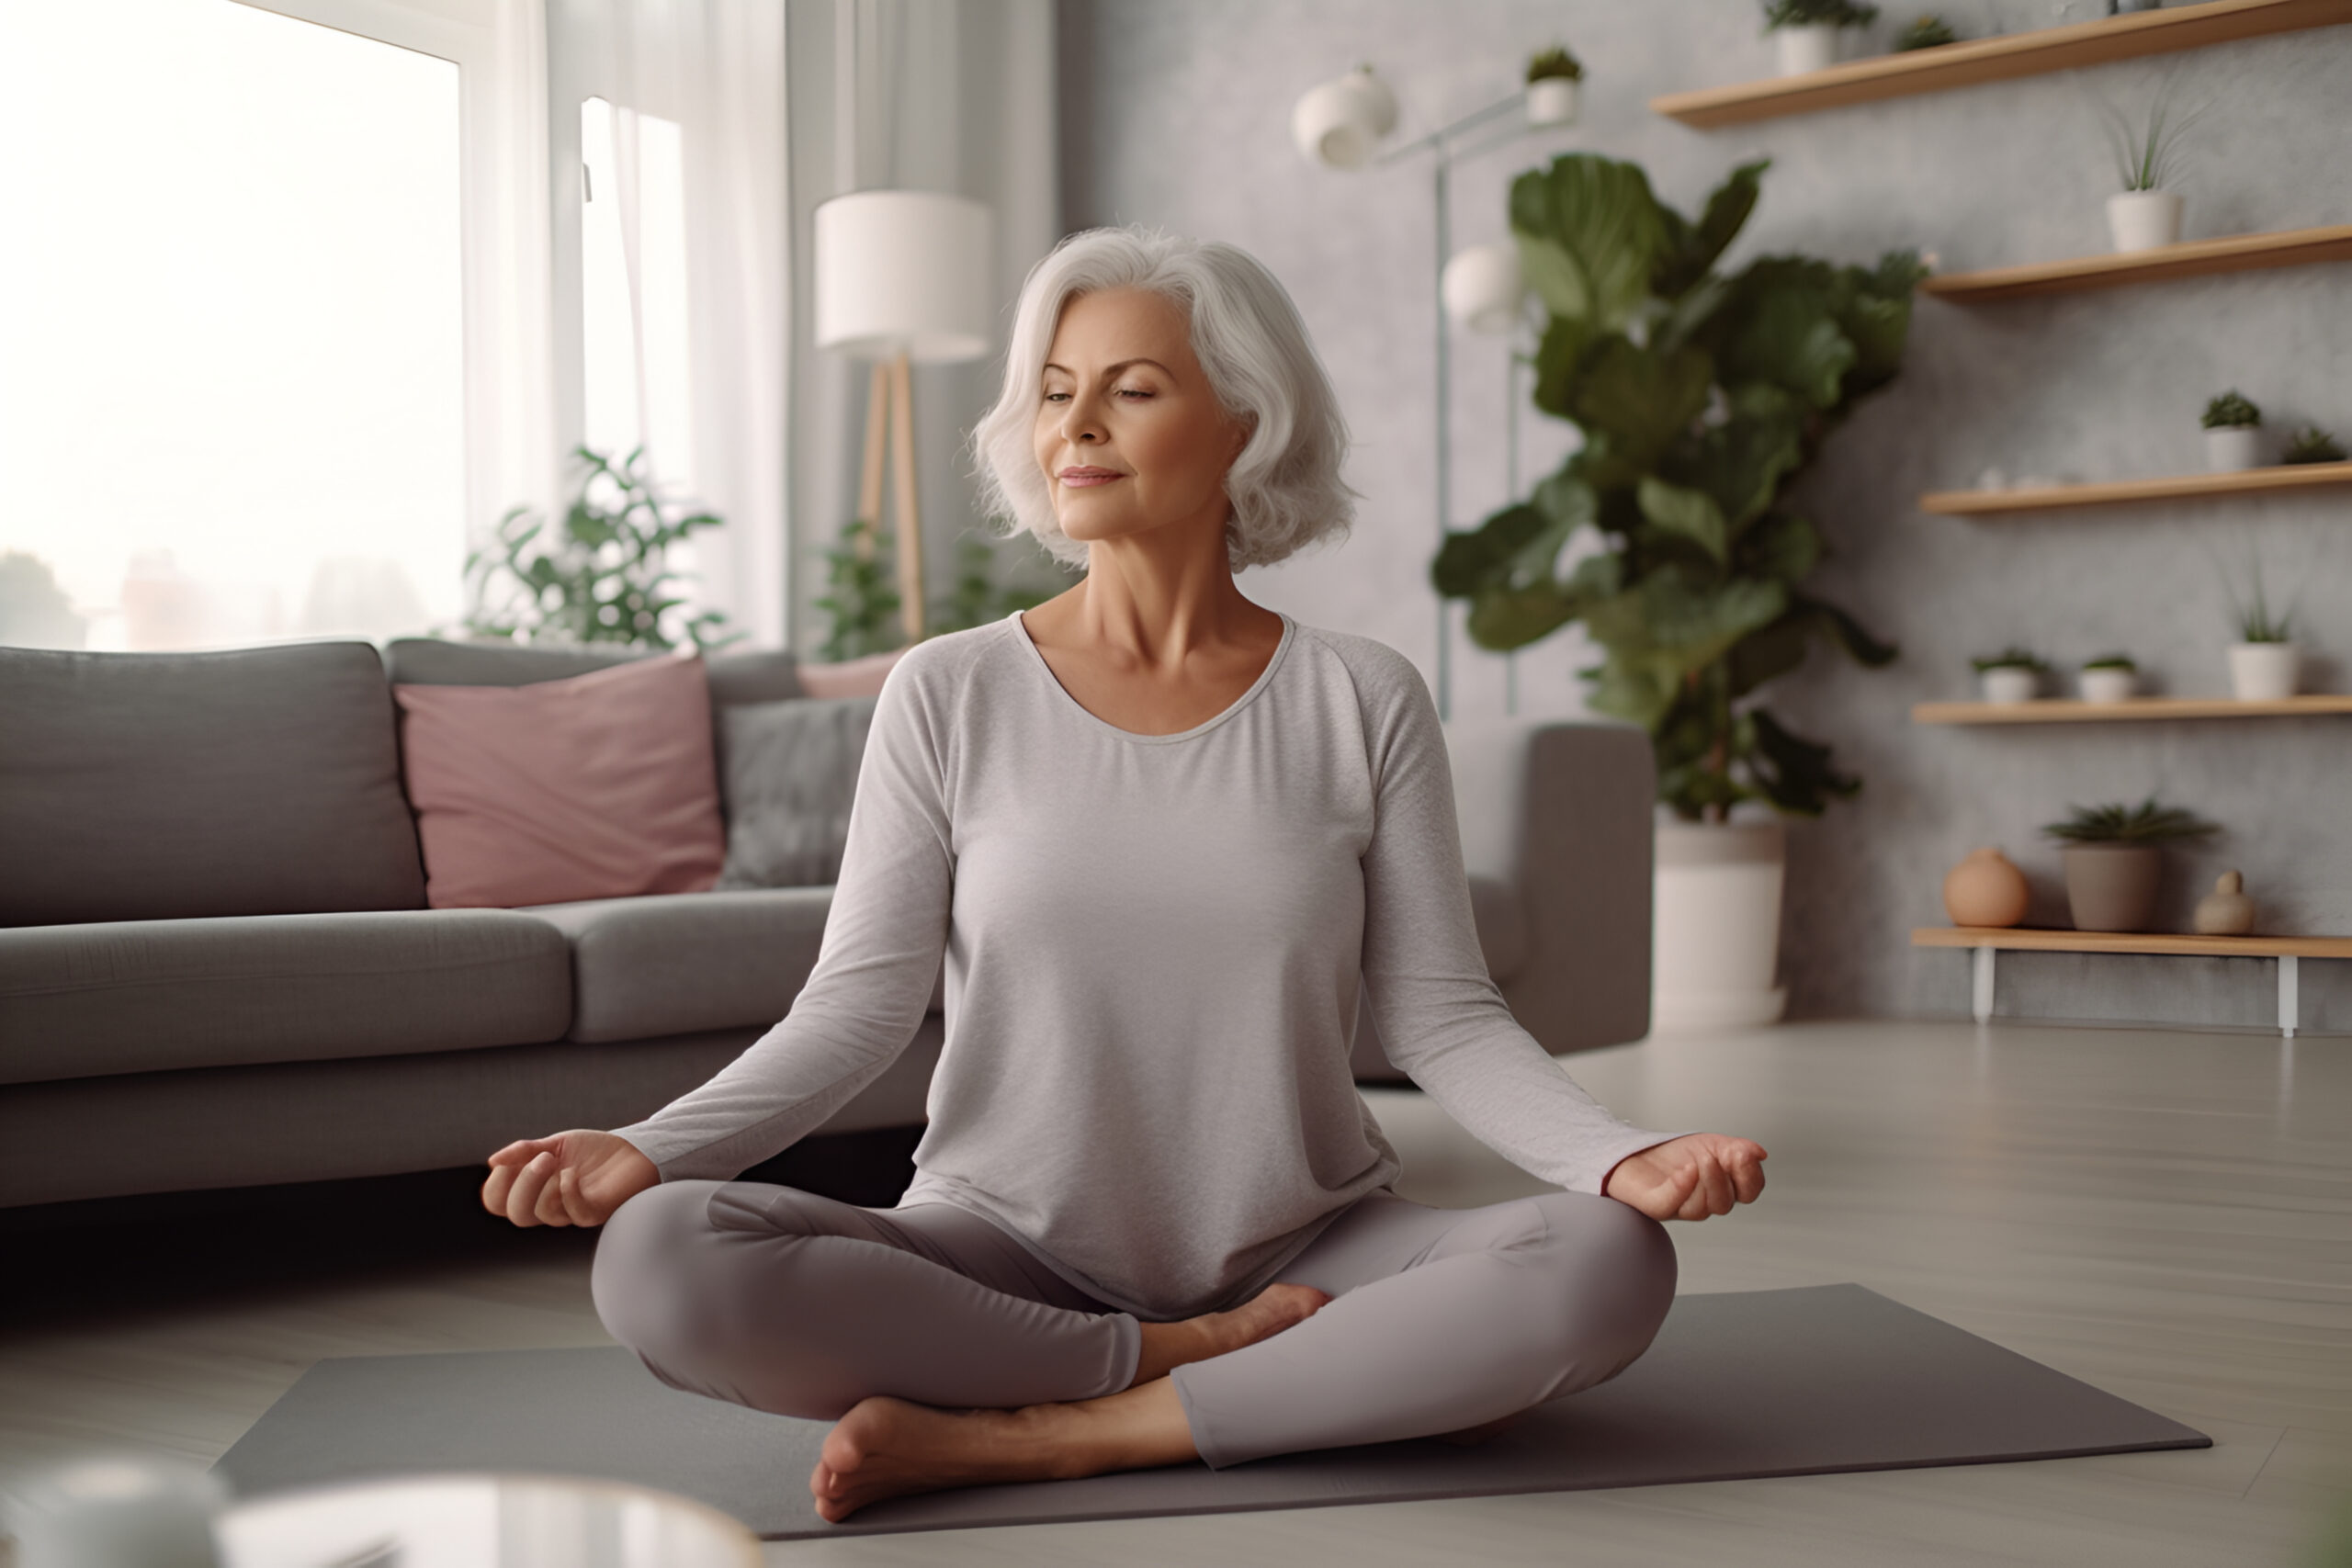 Alternative and complementary approaches to managing menopause symptoms, yoga